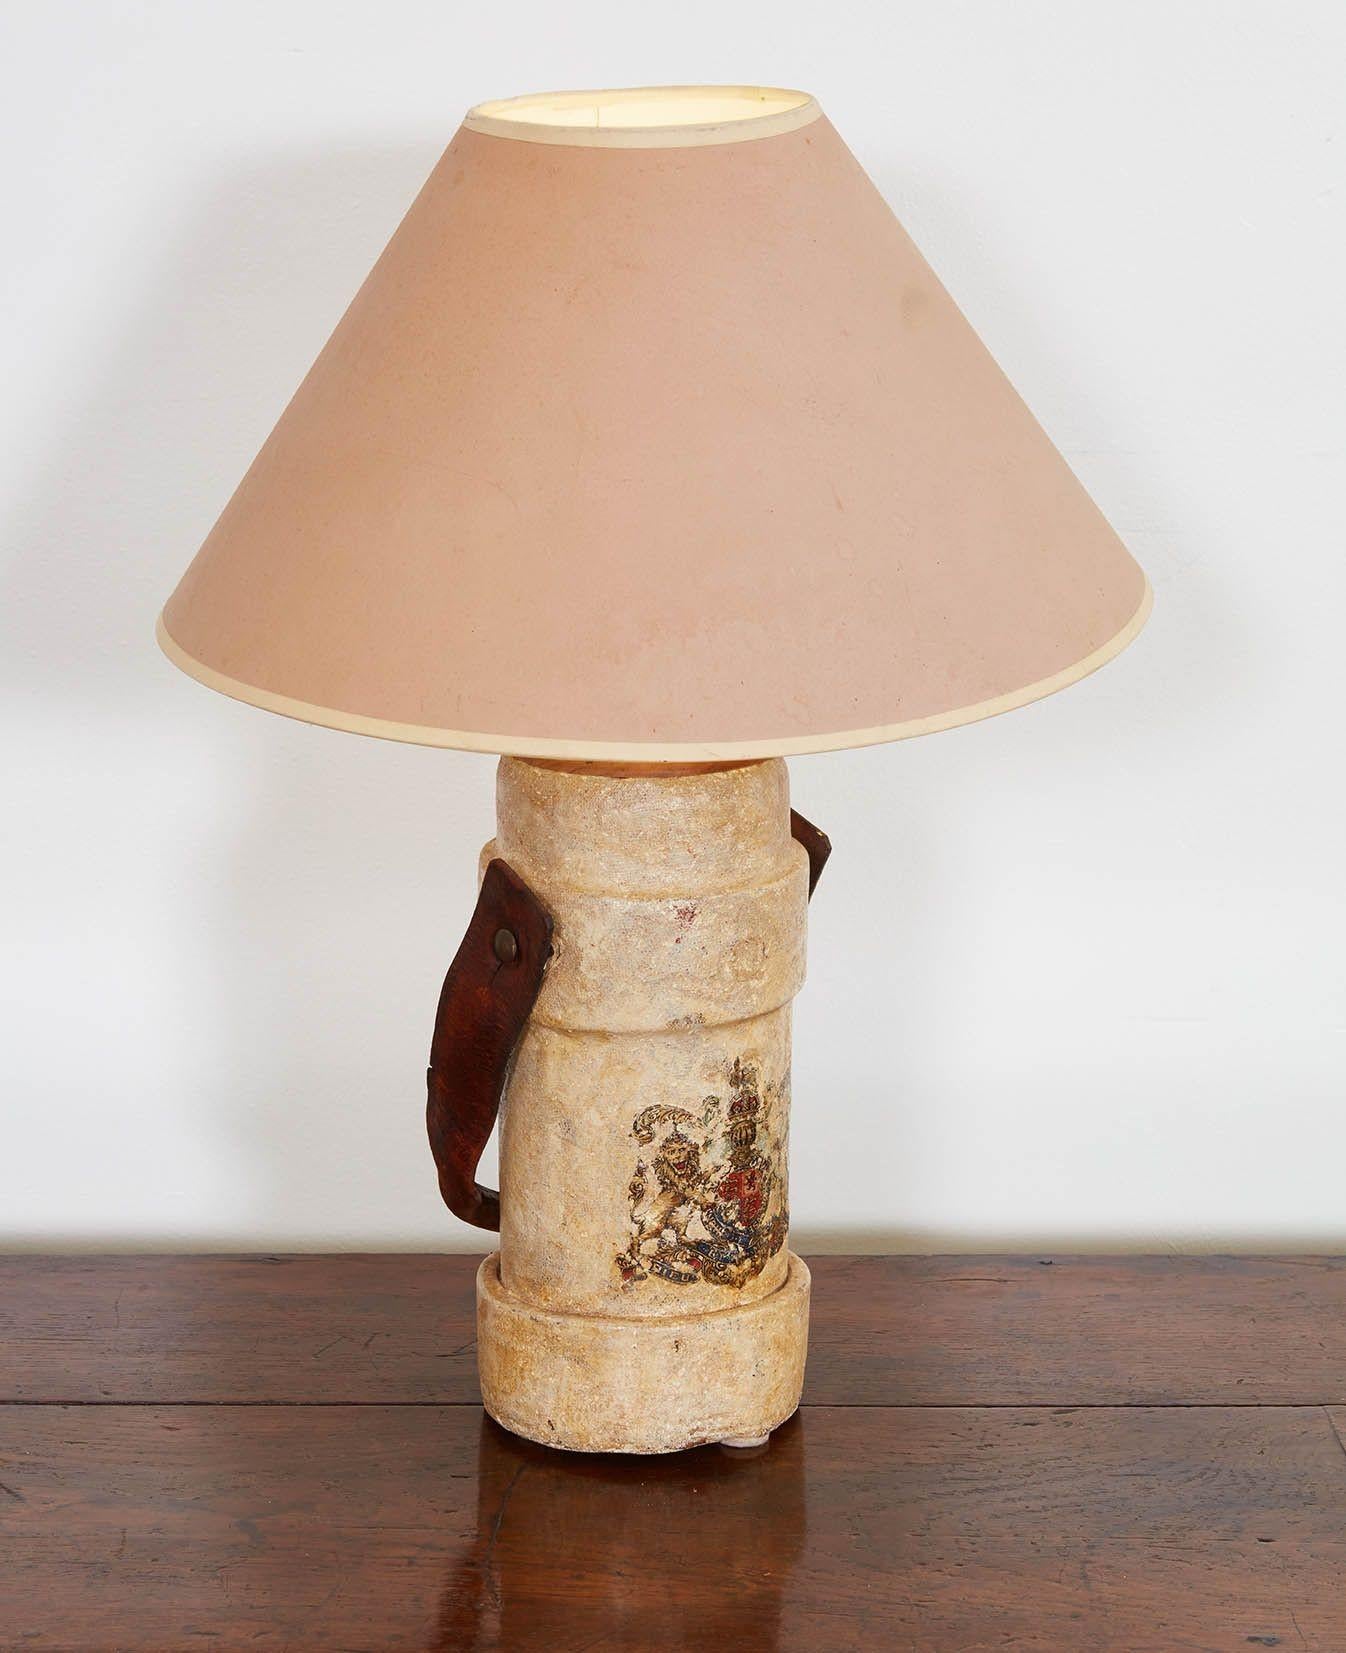 English early 20th century leather and oil cloth cordite or shell carrier, having leather strap handle and original Royal crest decal on an ivory white ground, now as lamp.